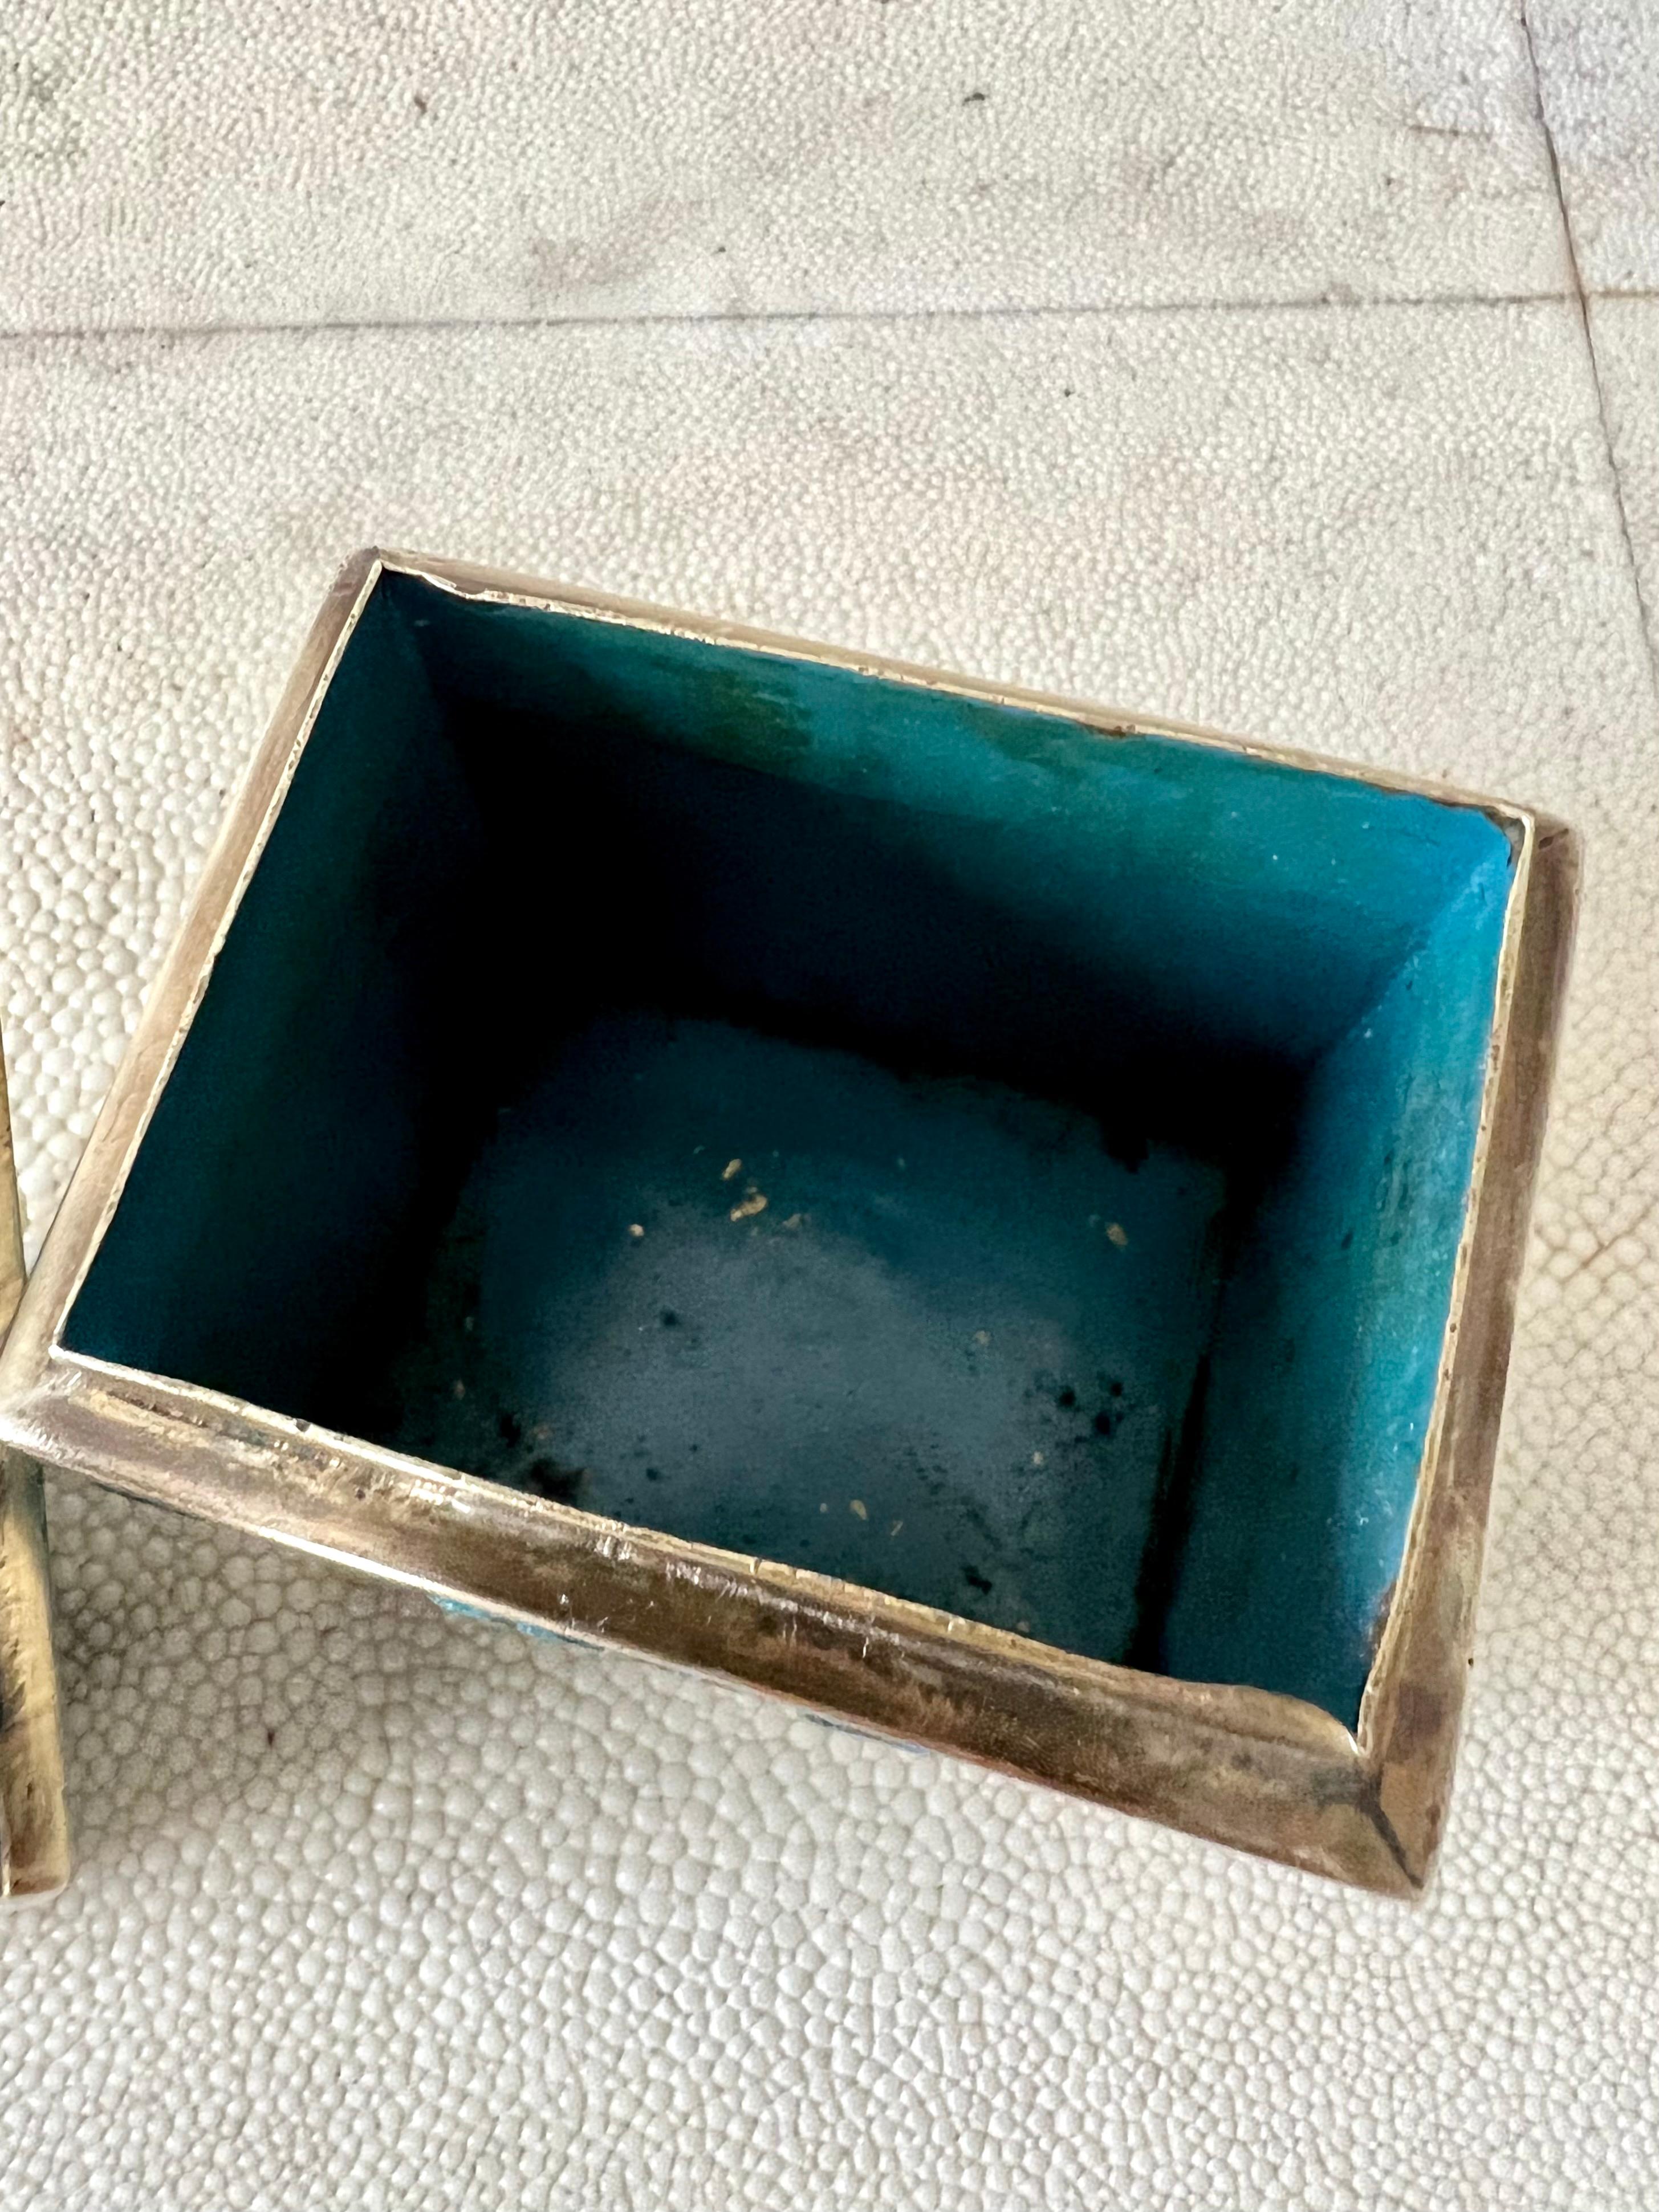 Turquoise/ blue colored mosaic glass tesserae and brass lidded box handmade in Mexico by noted Mexican artist Salvador Teran, circa 1950s. Featuring Aztec-inspired brass symbols on the lid and sides. This colorful box is a complement to any room to